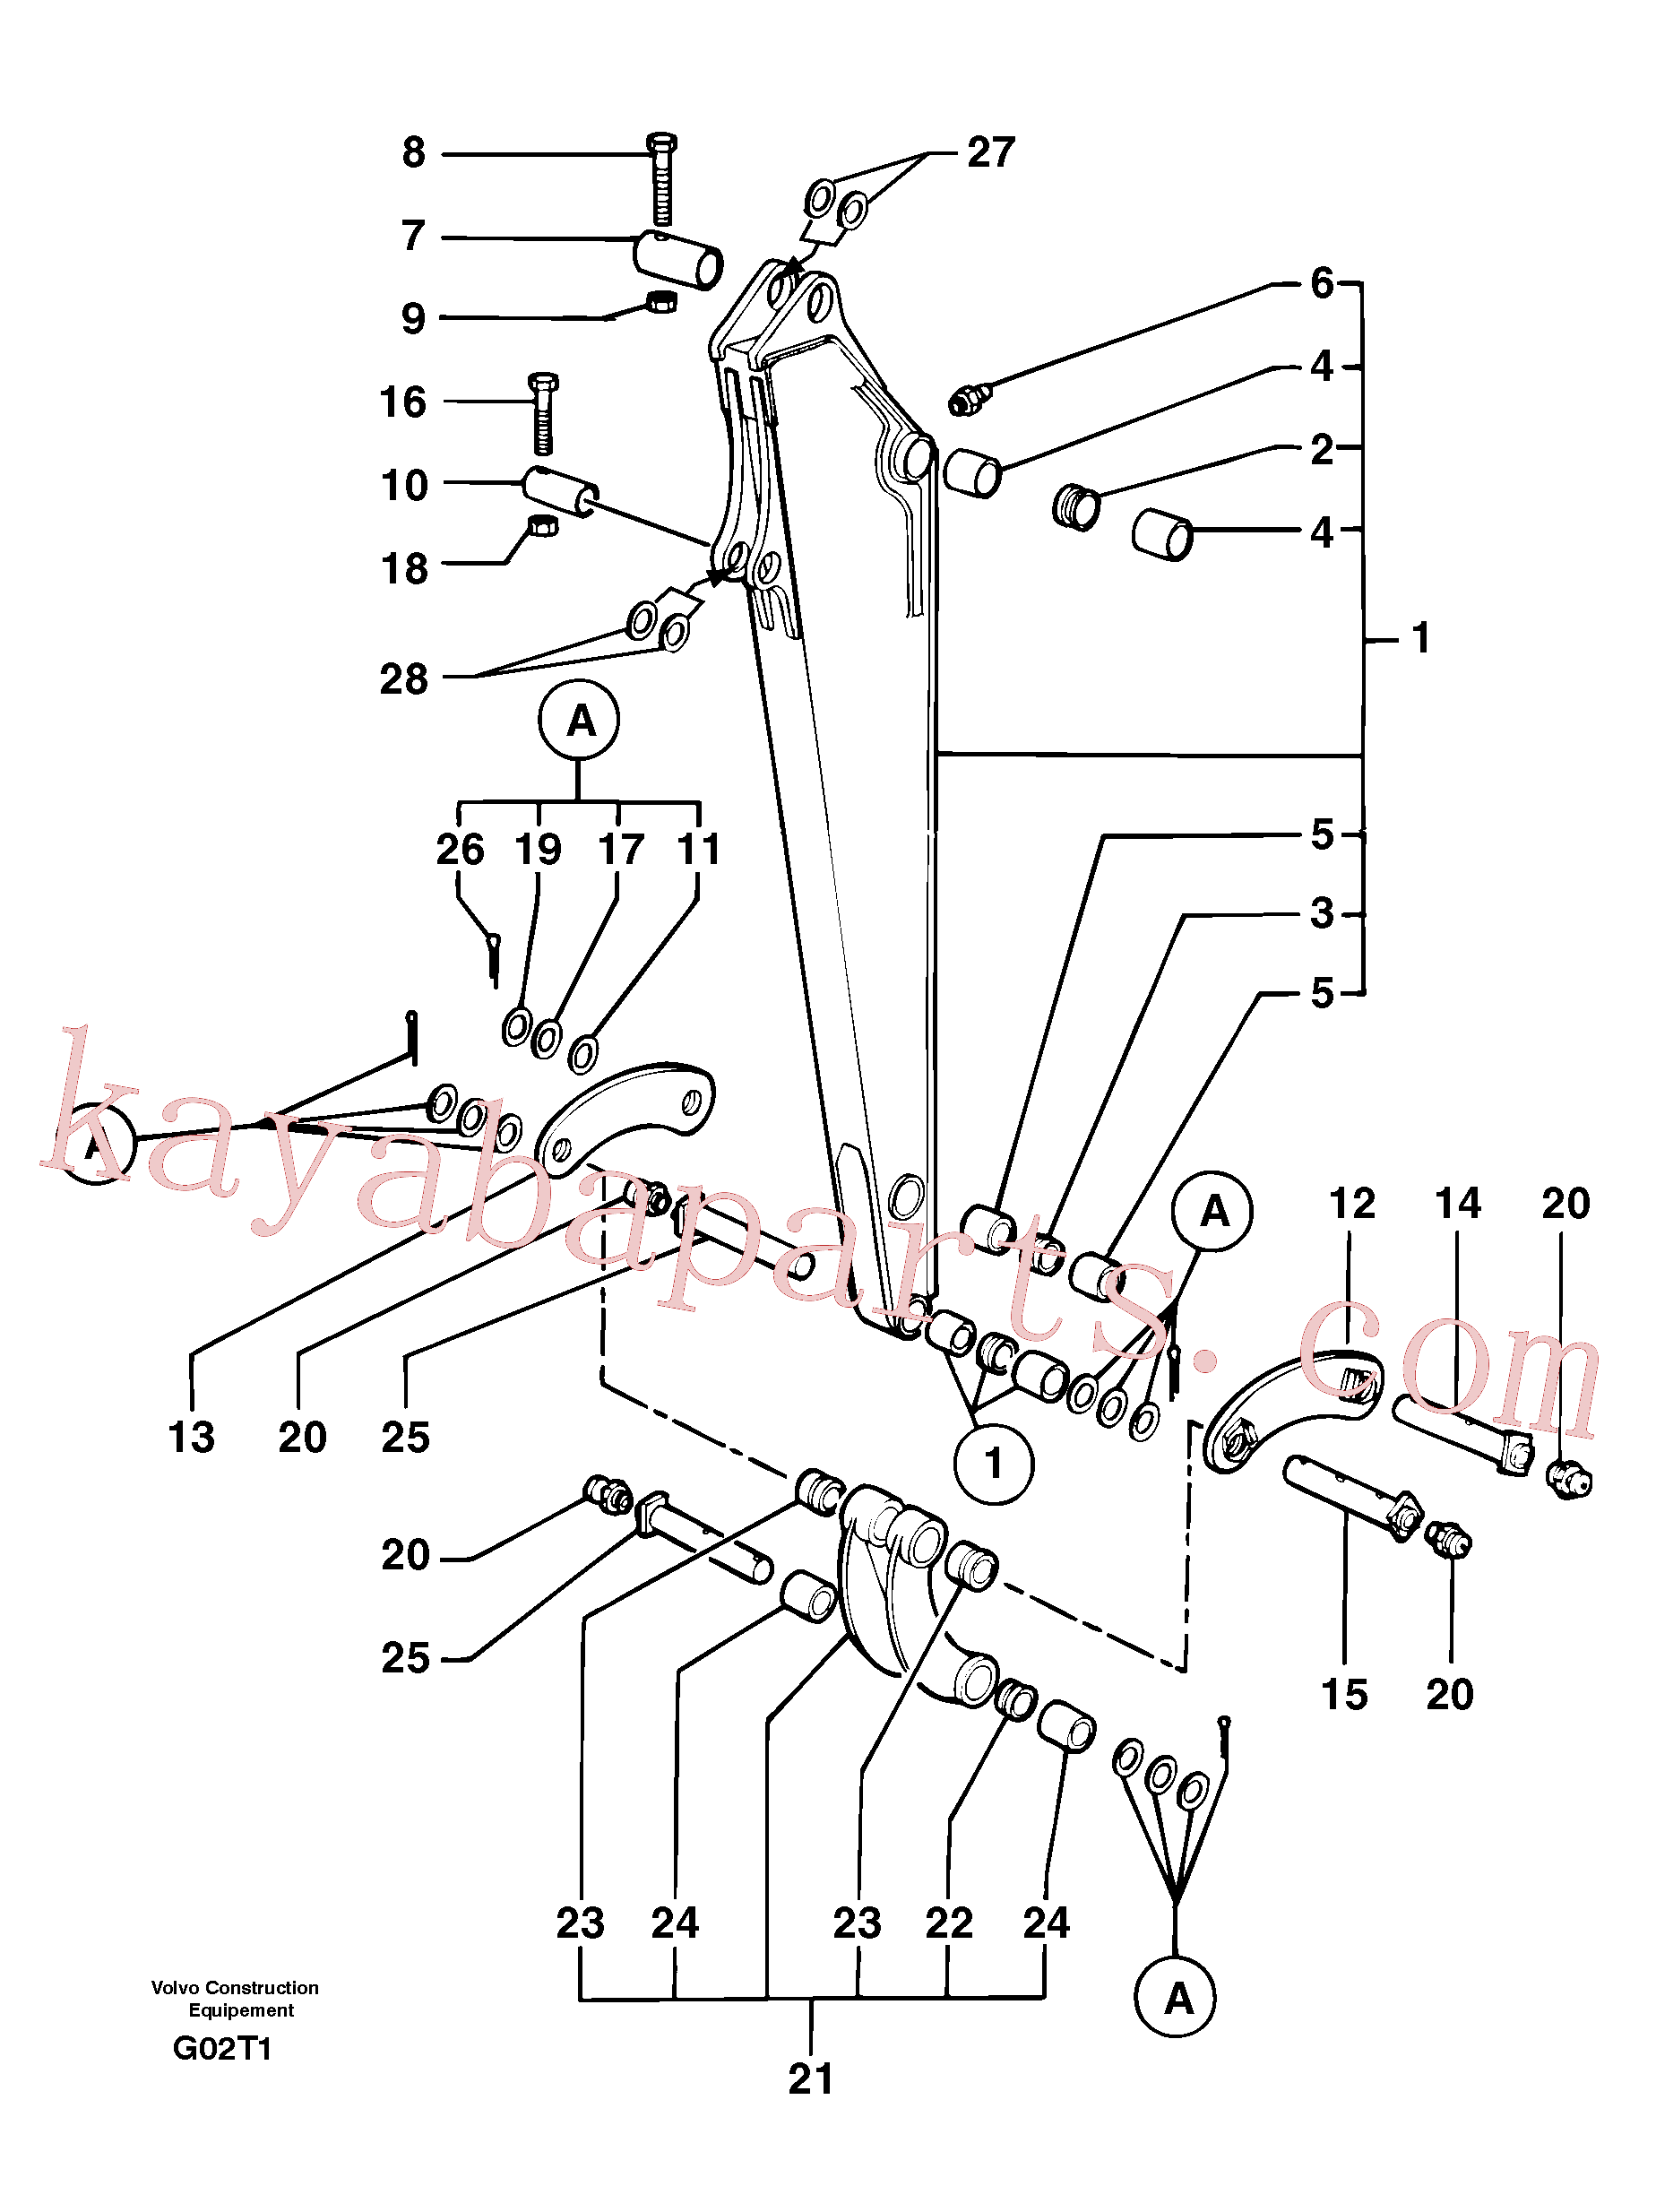 PJ4550065 for Volvo Dipper arm(G02T1 assembly)